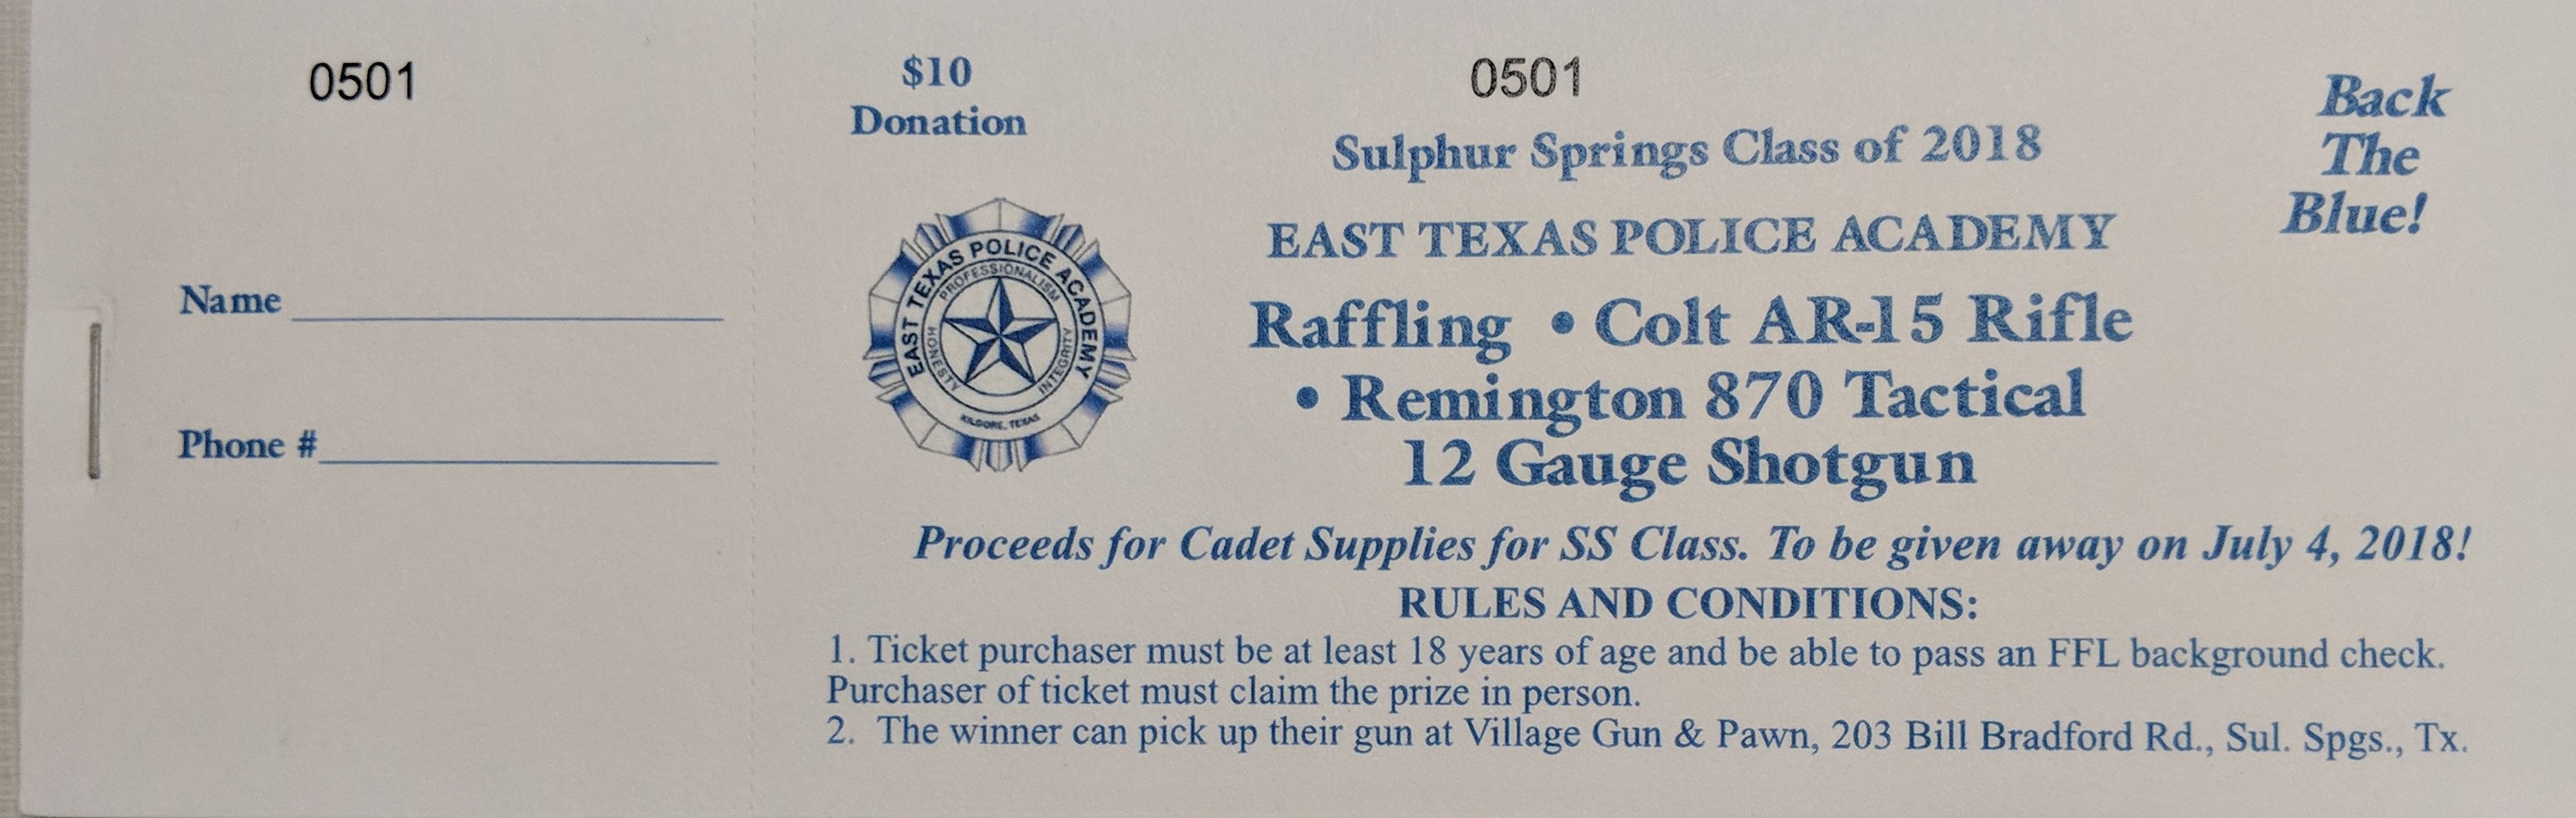 East Texas Police Academy Class of 2018 Selling Gun-Raffle Tickets to Help With Cadet Expenses